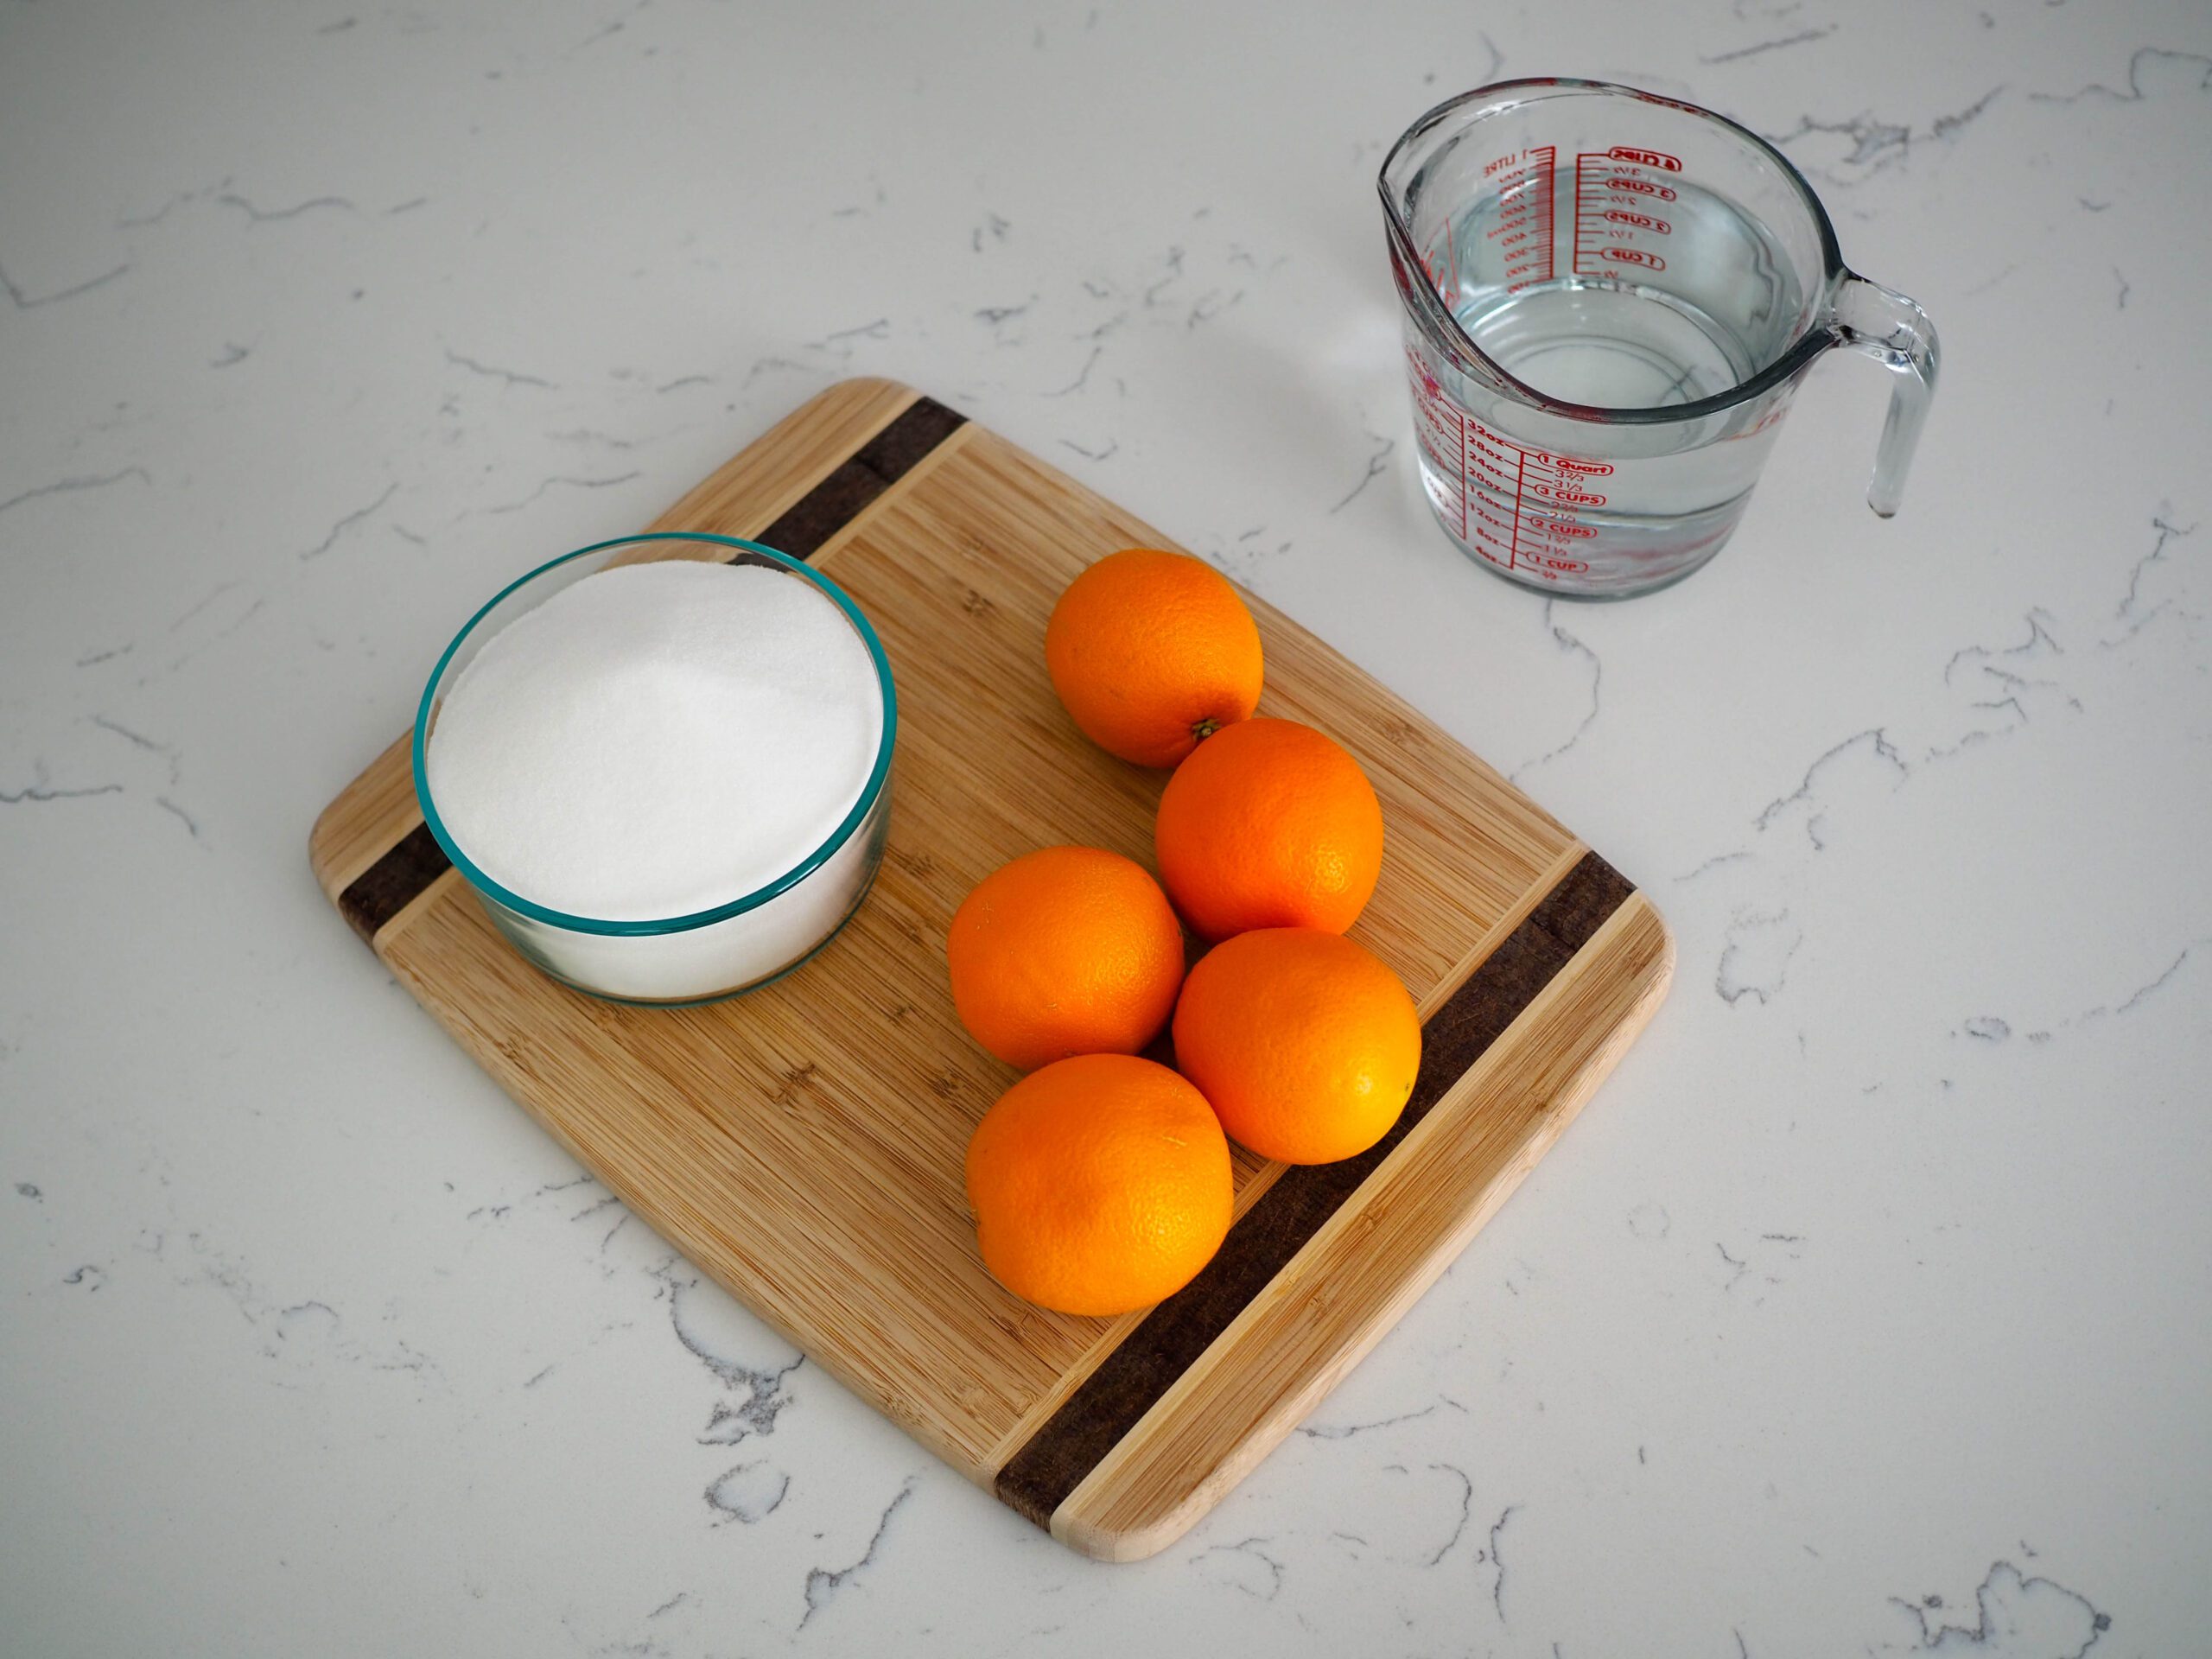 Five oranges, a bowl of sugar, and water on a quartz counter.